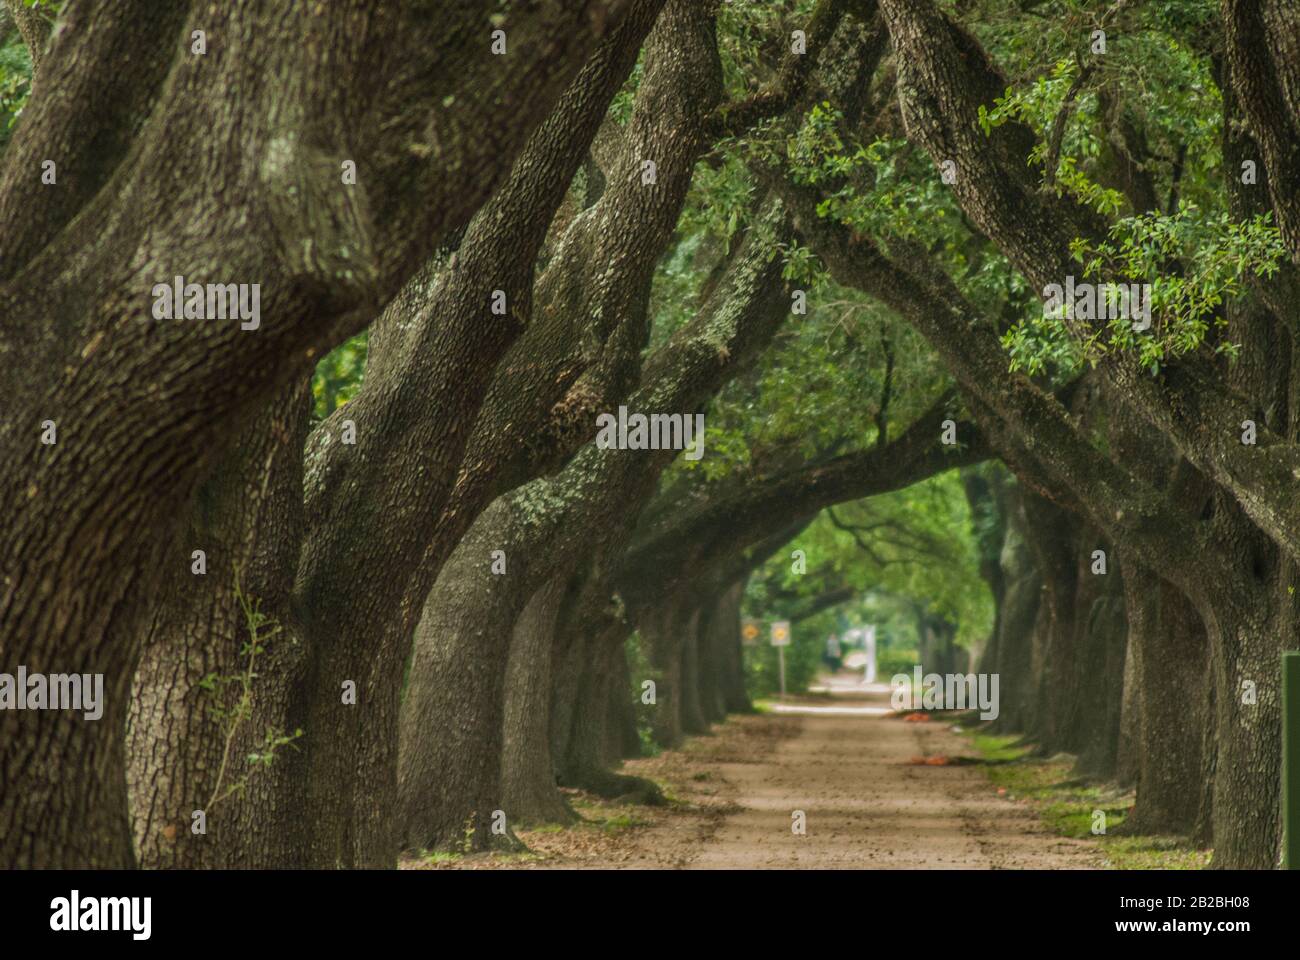 Tall live oaks create a leafy archway over a path next to Rice University in Houston Texas. Stock Photo